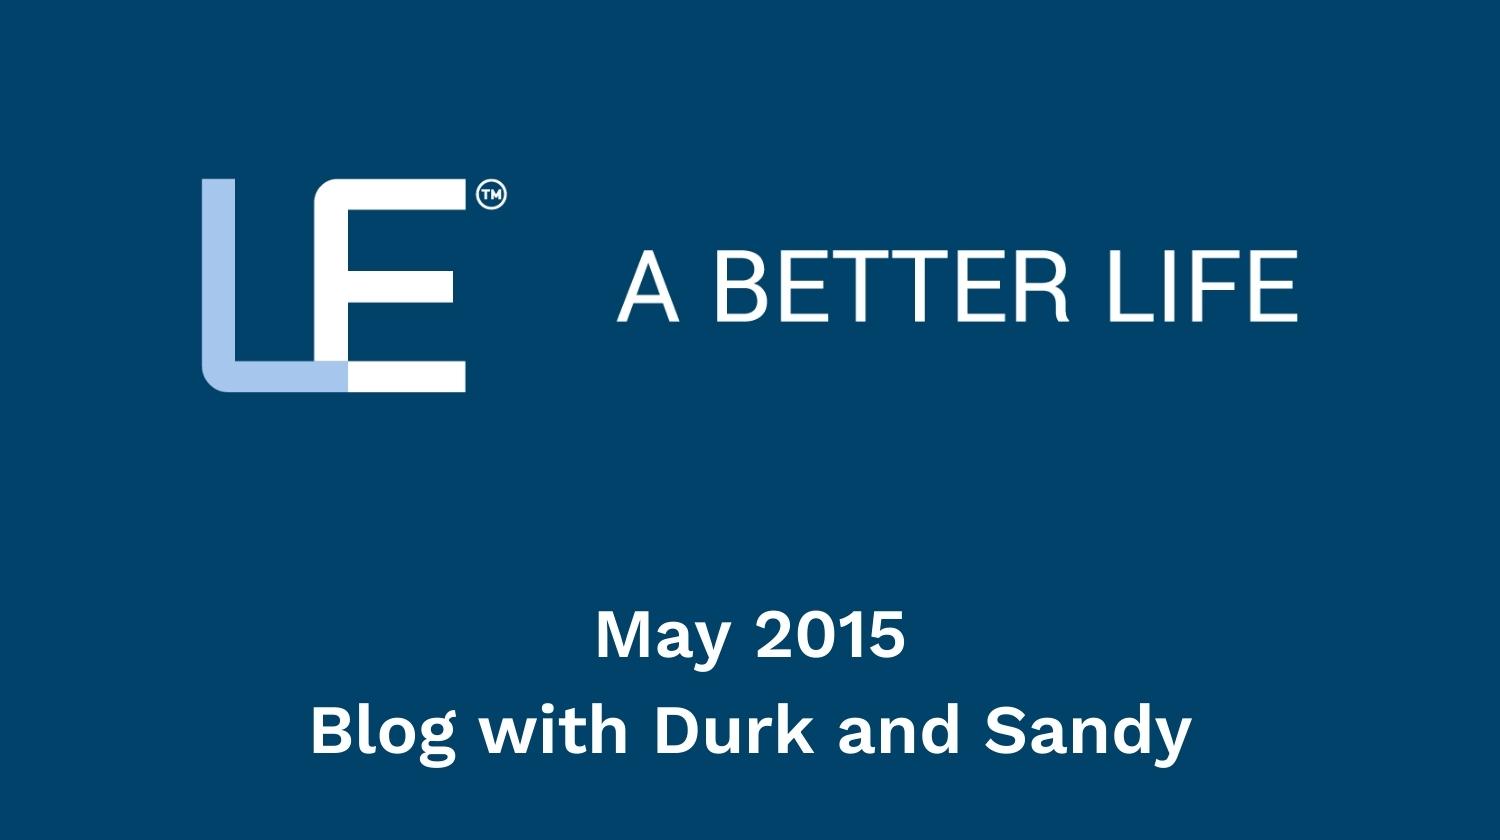 May 2015 Blog with Durk and Sandy